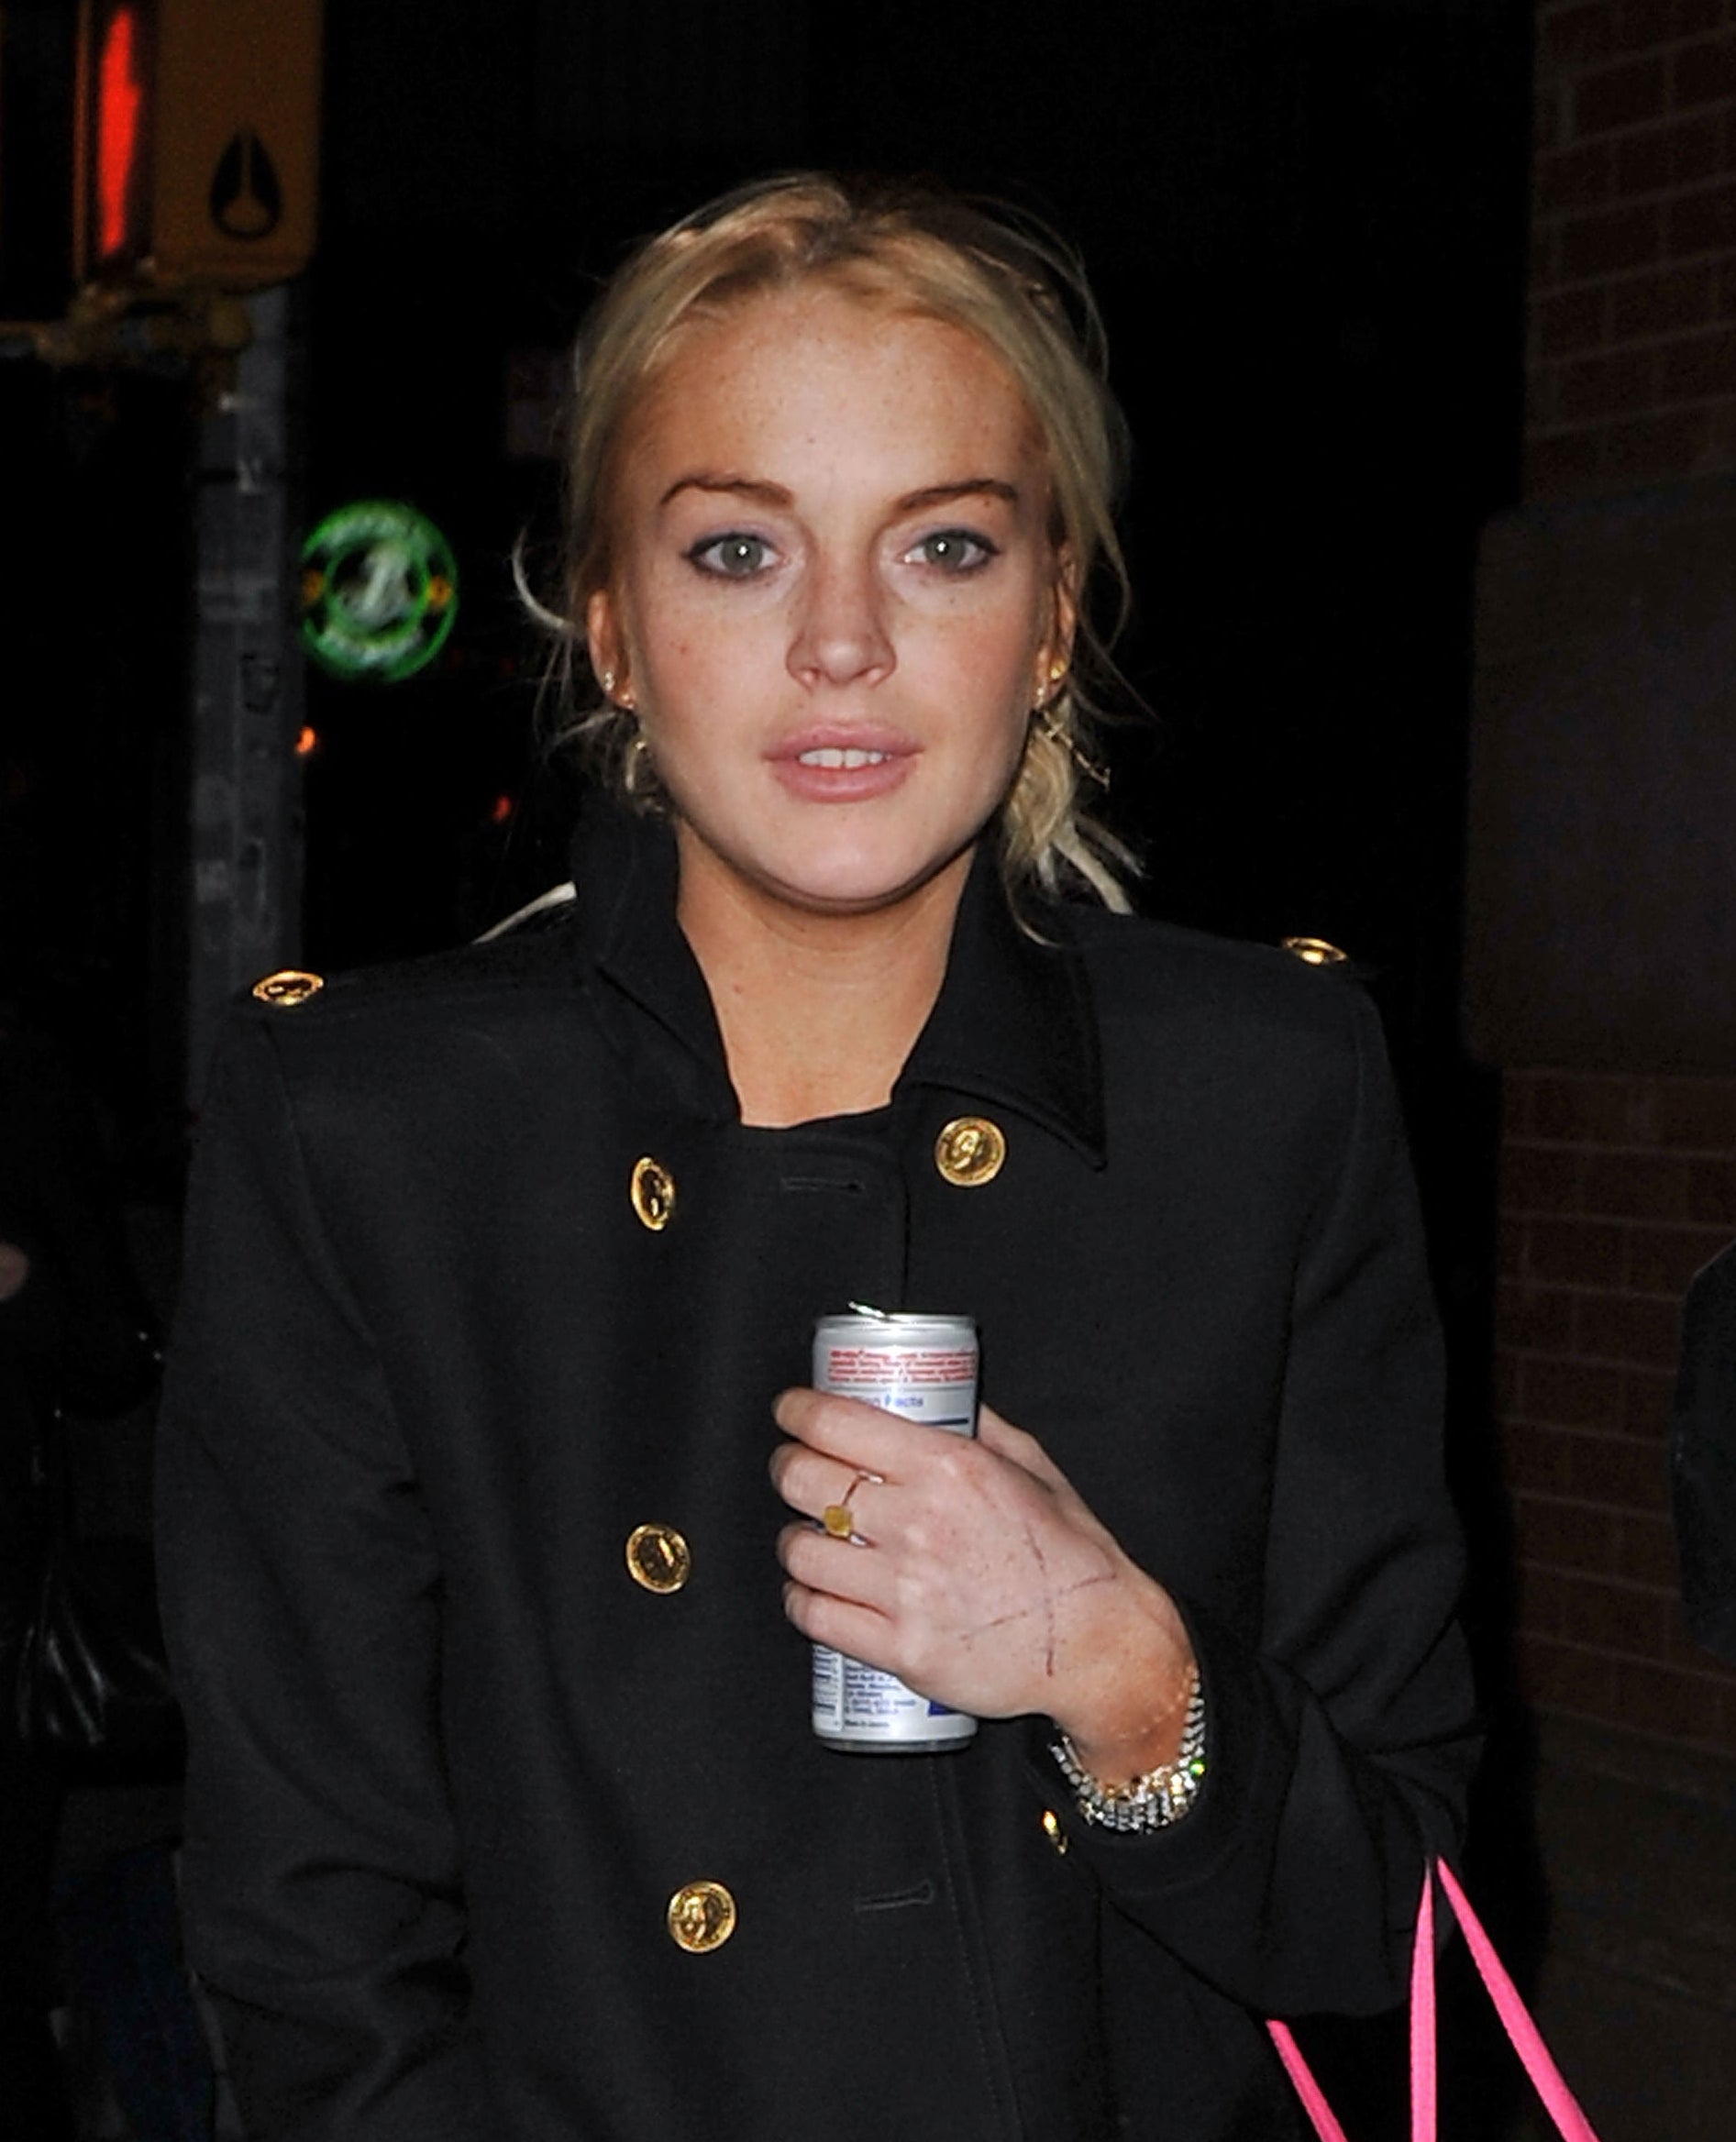 Lindsay Lohan in a double-breasted jacket holding a canned drink, standing on a sidewalk at night